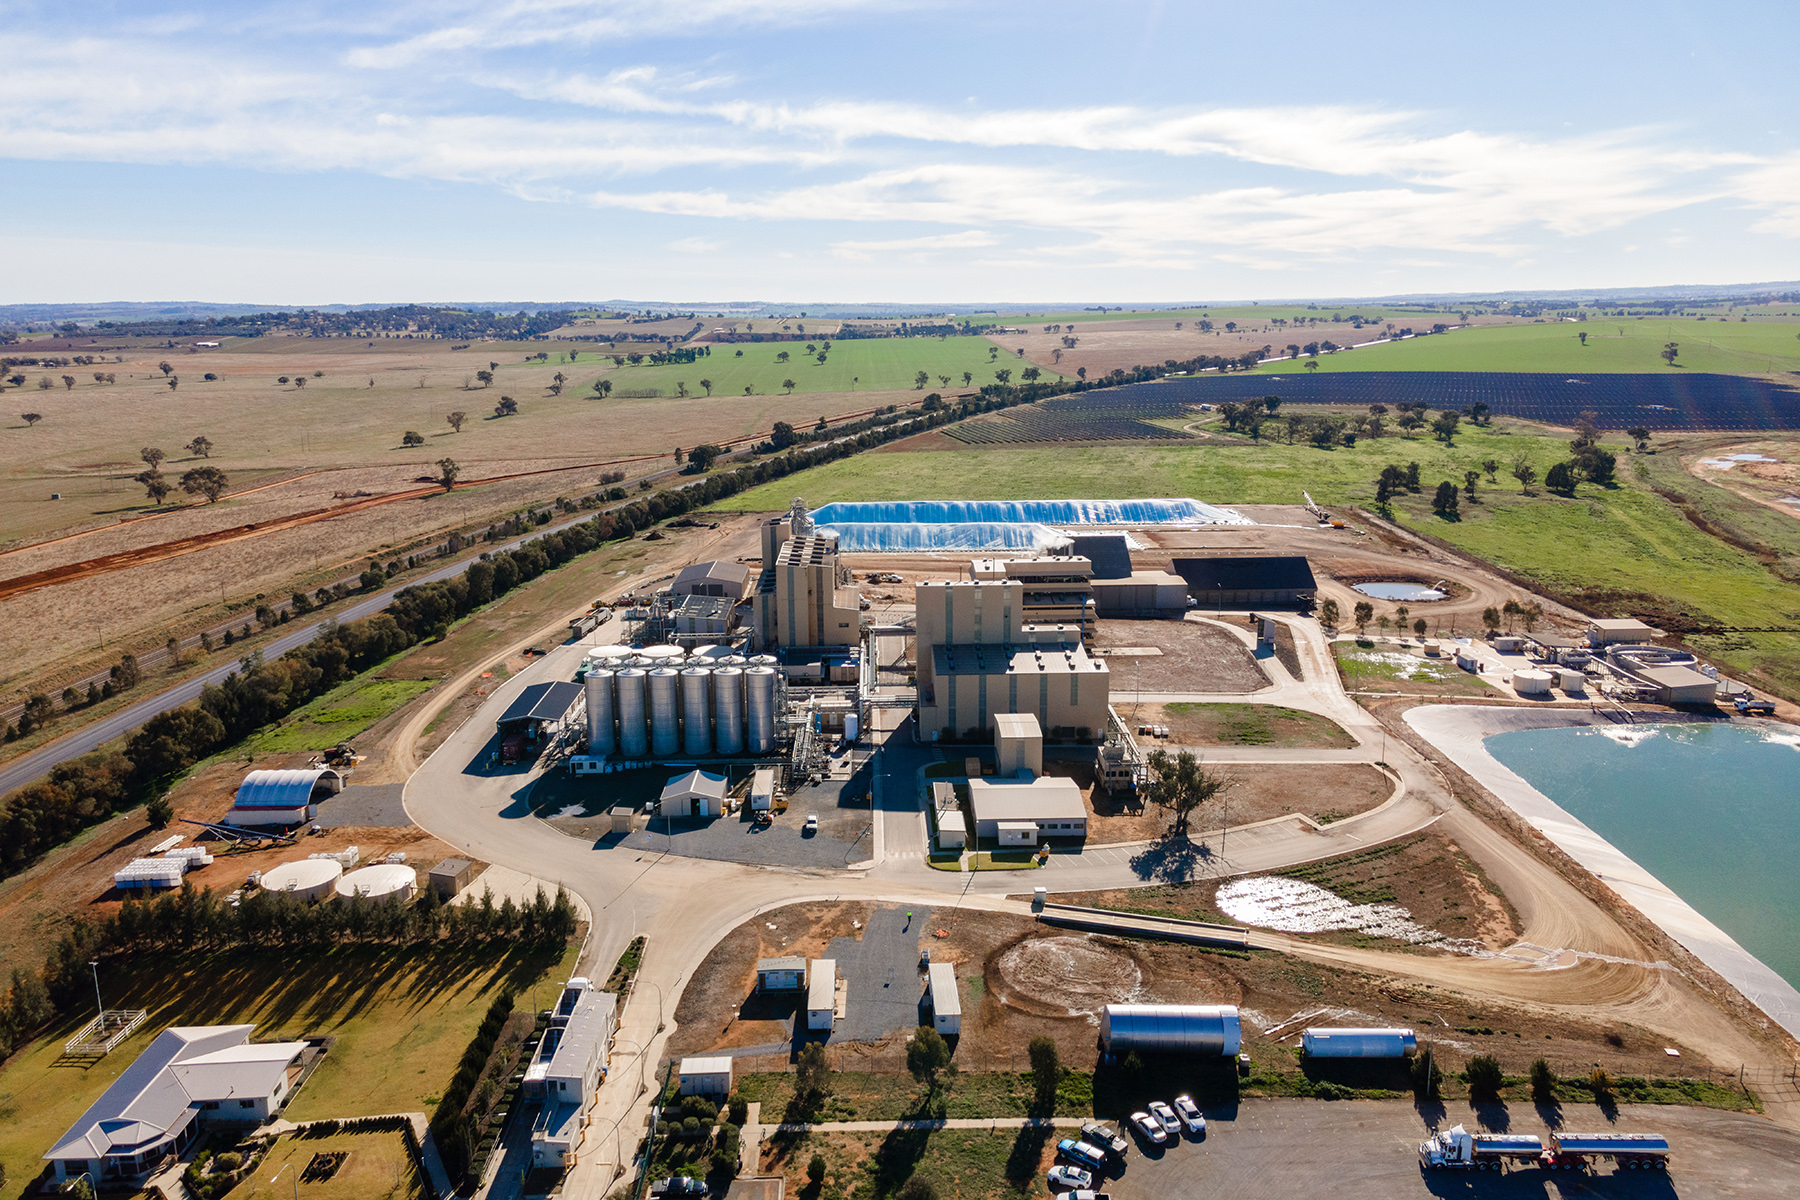 Riverina Oils is on the doorstep of the Inland Rail Albury to Illabo alignment and the Riverina Intermodal Freight Terminal